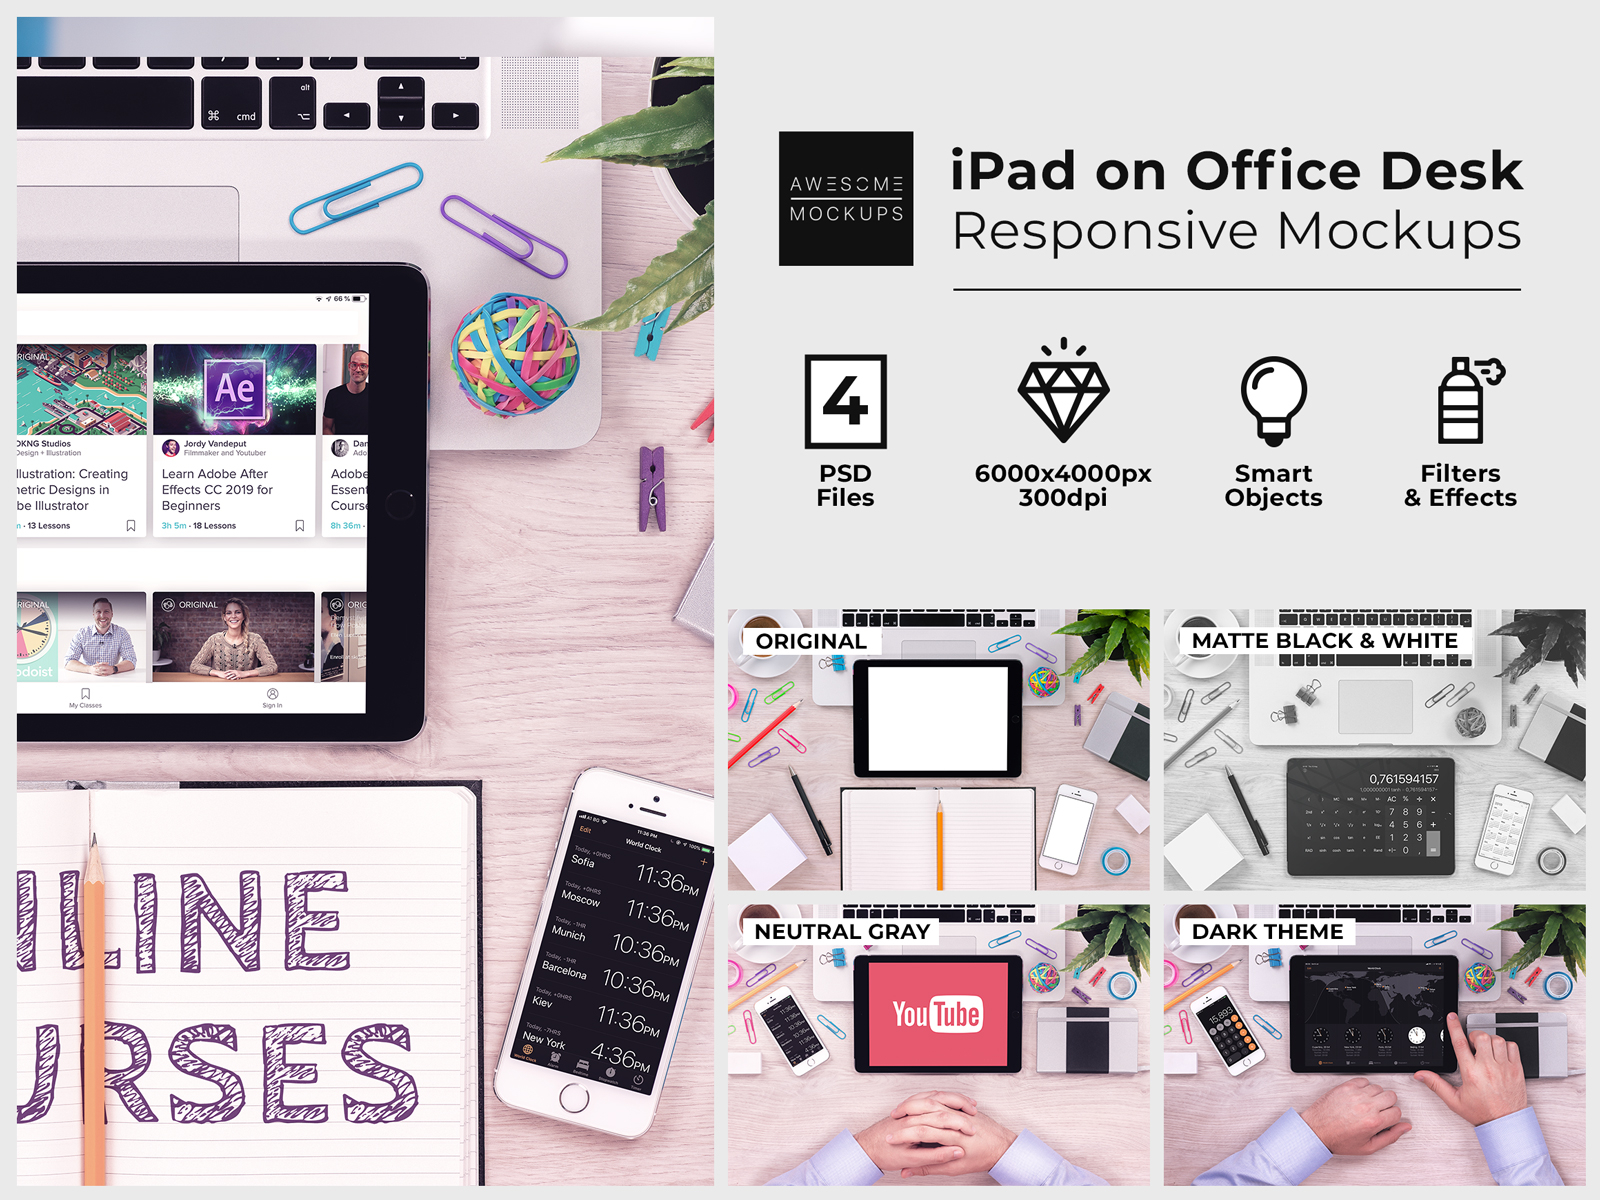 Download iPad on Office Desk Top View Mockups by Alexey Boldin on Dribbble